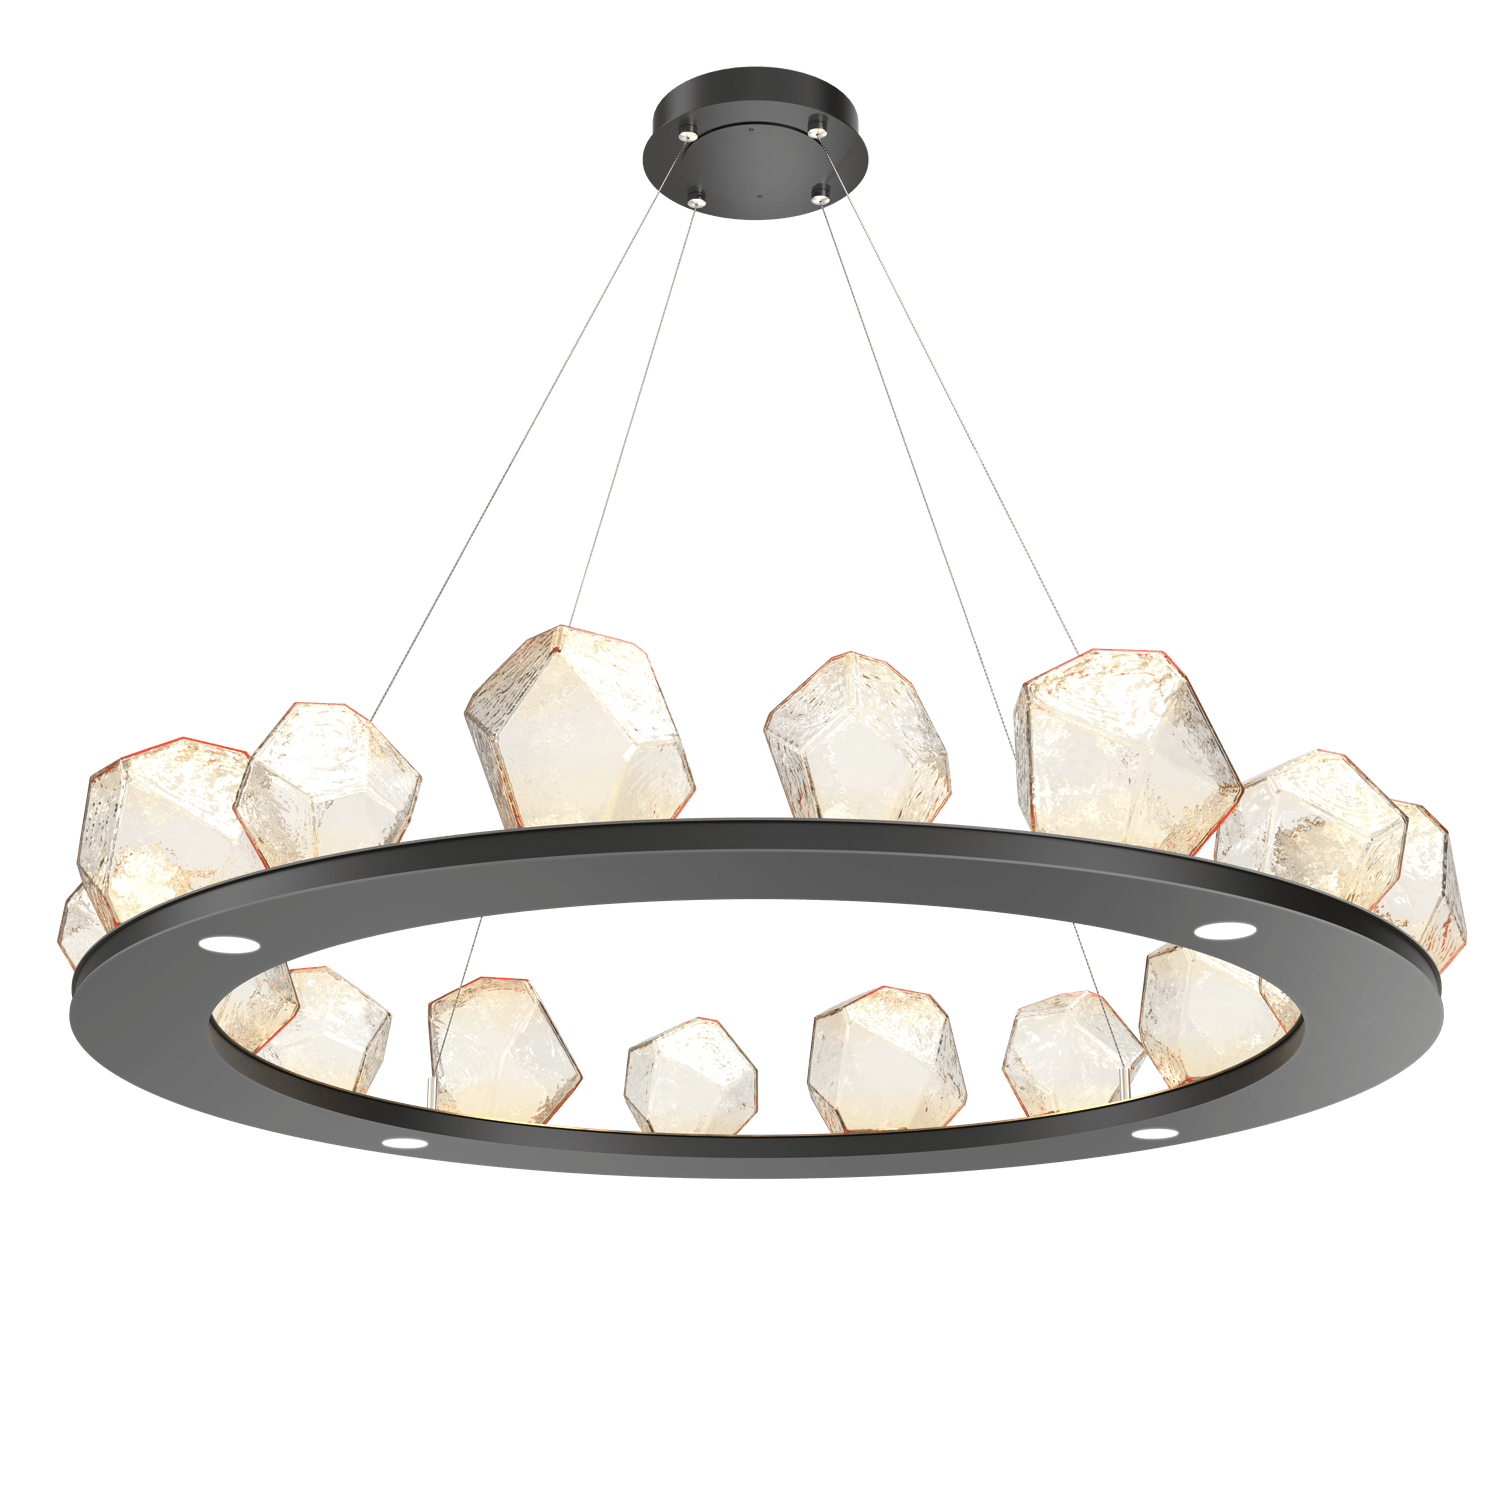 CHB0039-0D-MB-A-Hammerton-Studio-Gem-48-inch-ring-chandelier-with-matte-black-finish-and-amber-blown-glass-shades-and-LED-lamping